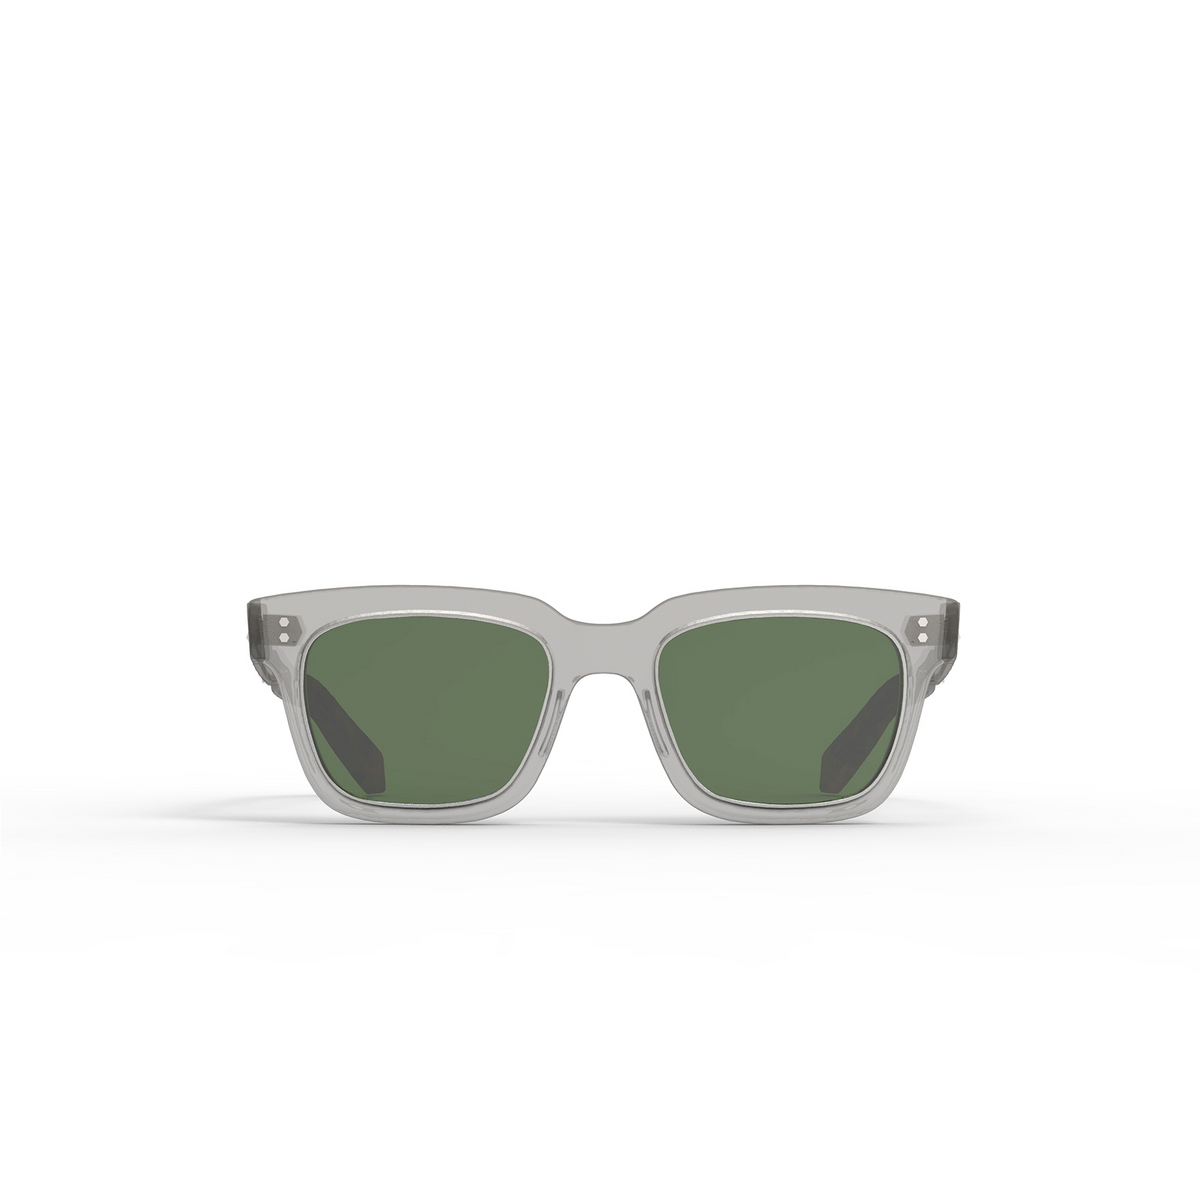 Mr. Leight® Square Sunglasses: Arnie S color Grey Crystal-matte Platinum/green Grycry-mplt/grn - front view.